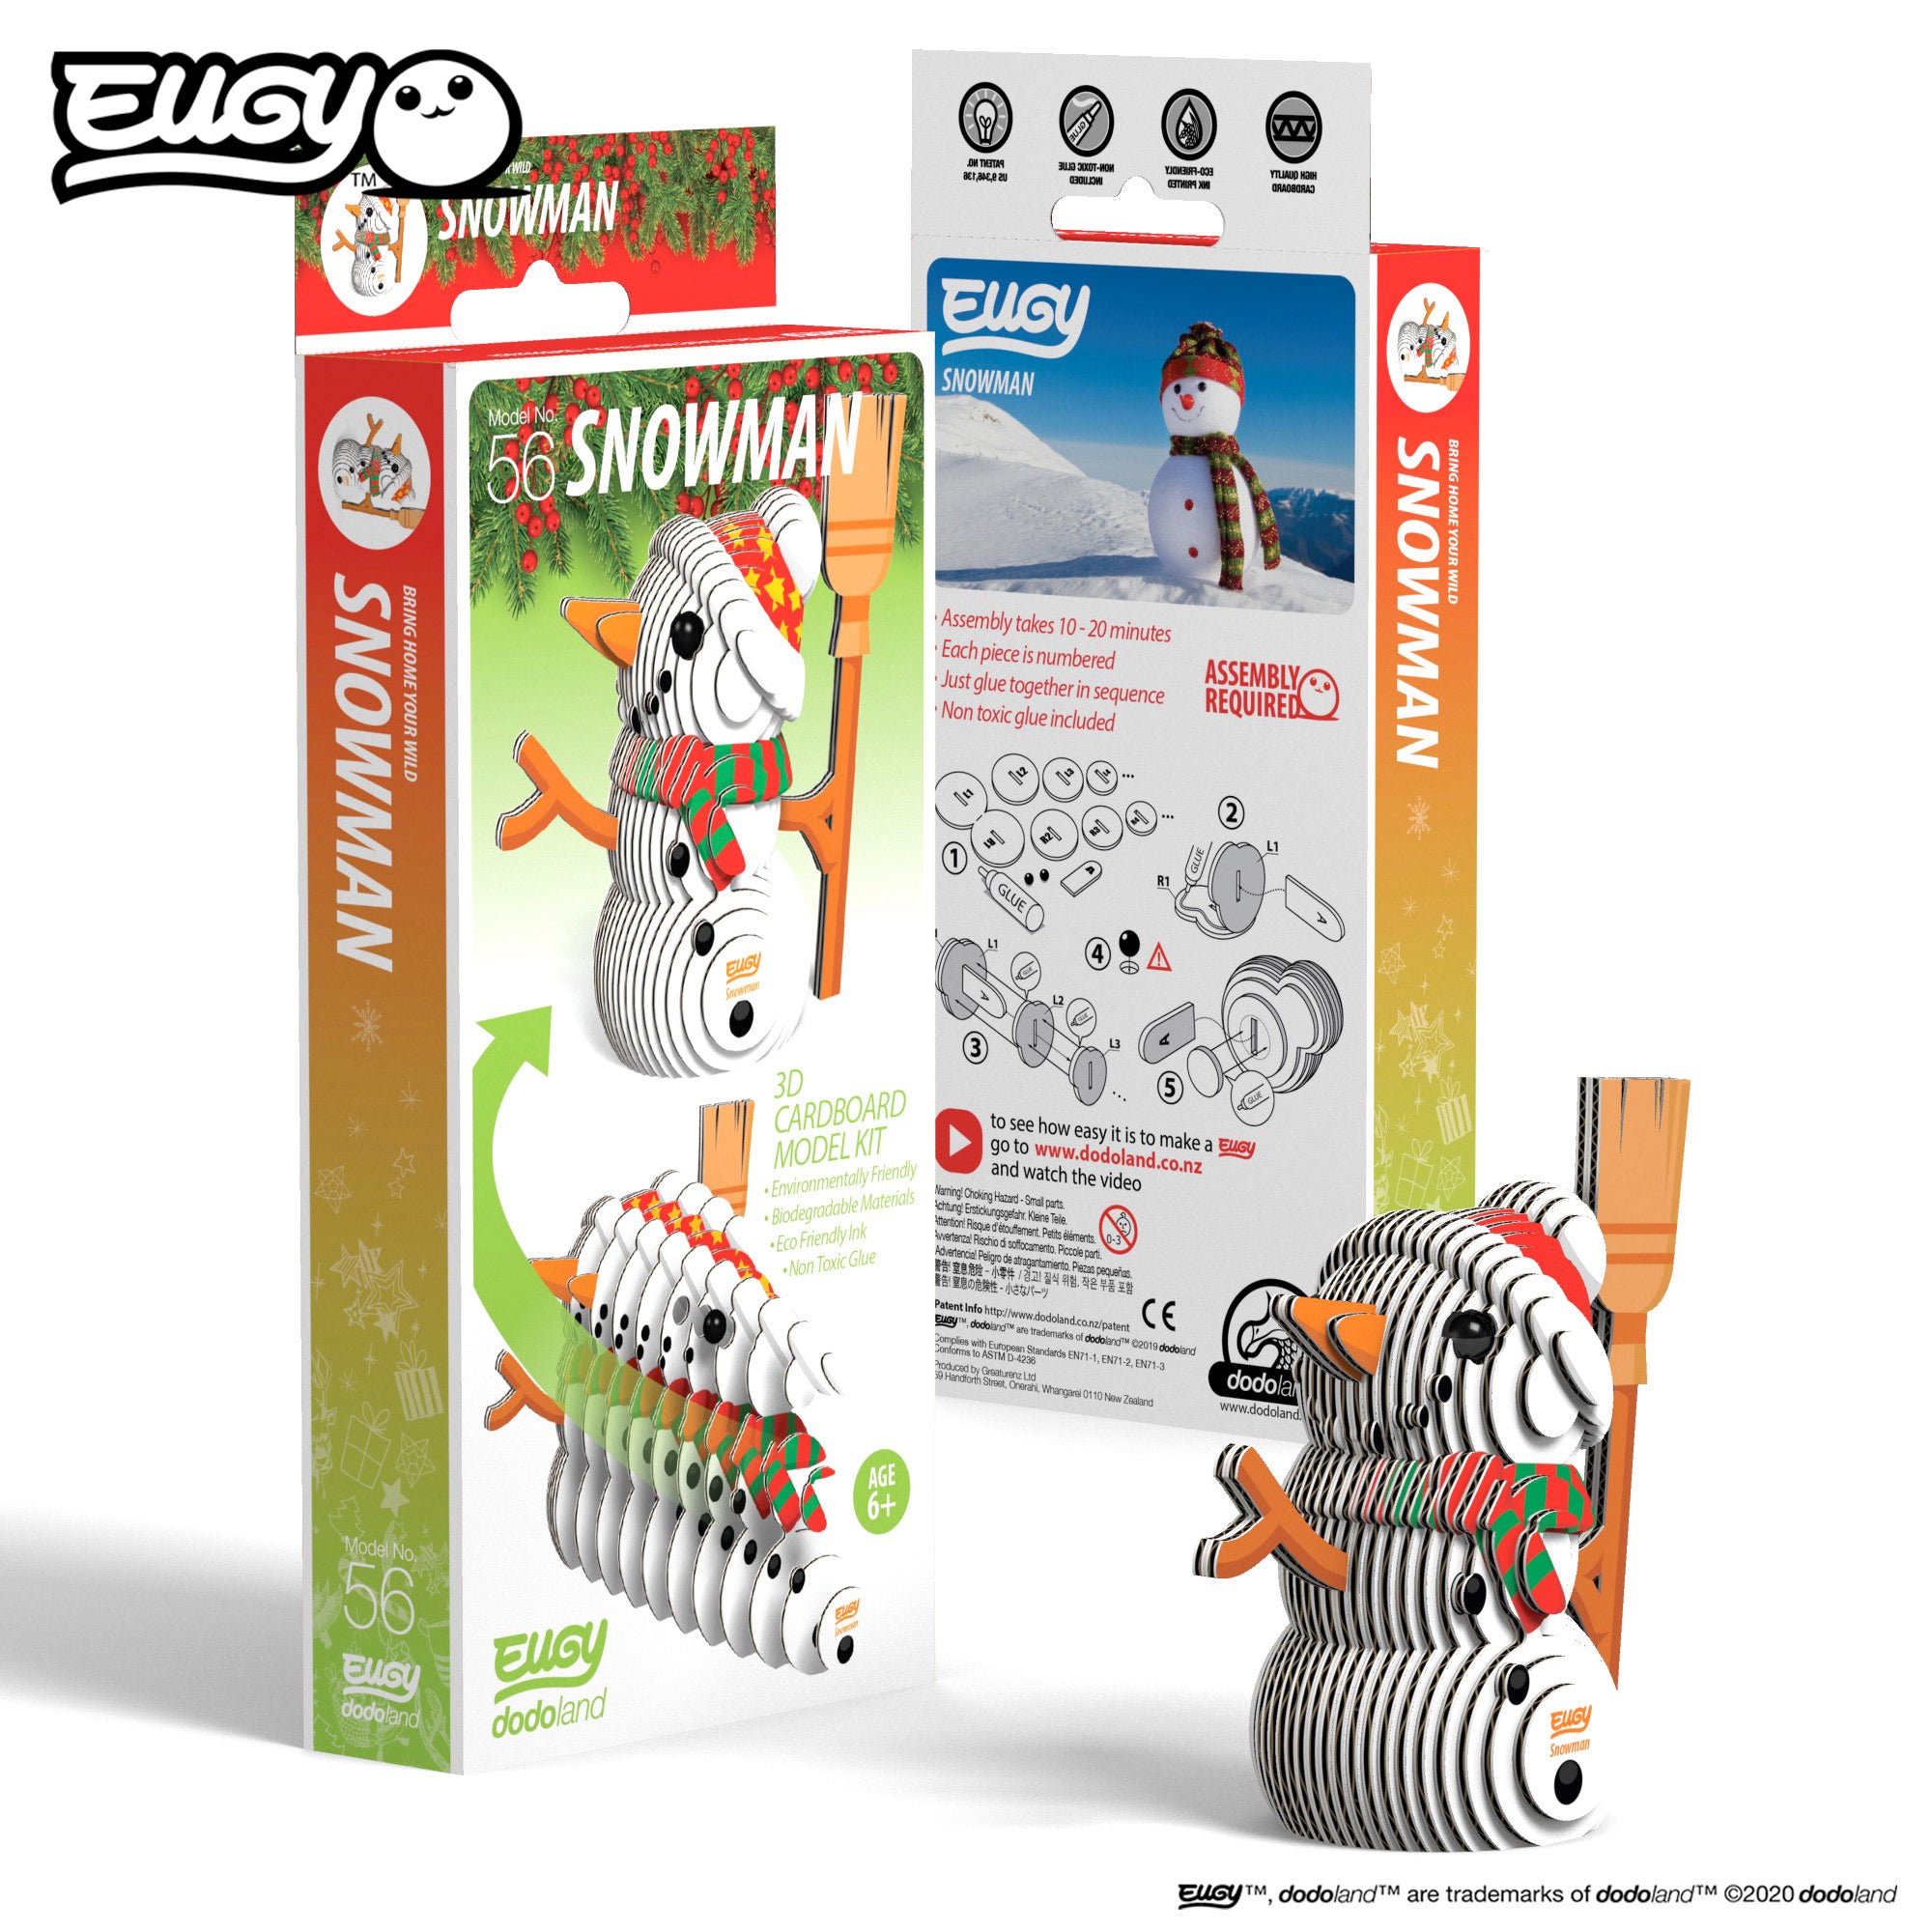 Image of an EUGY Snowman, facing slightly left and viewed from the front. In front of two EUGY Kangaroo Boxes, 1 showing the front cover and the other showing the rear of the box, against a white background